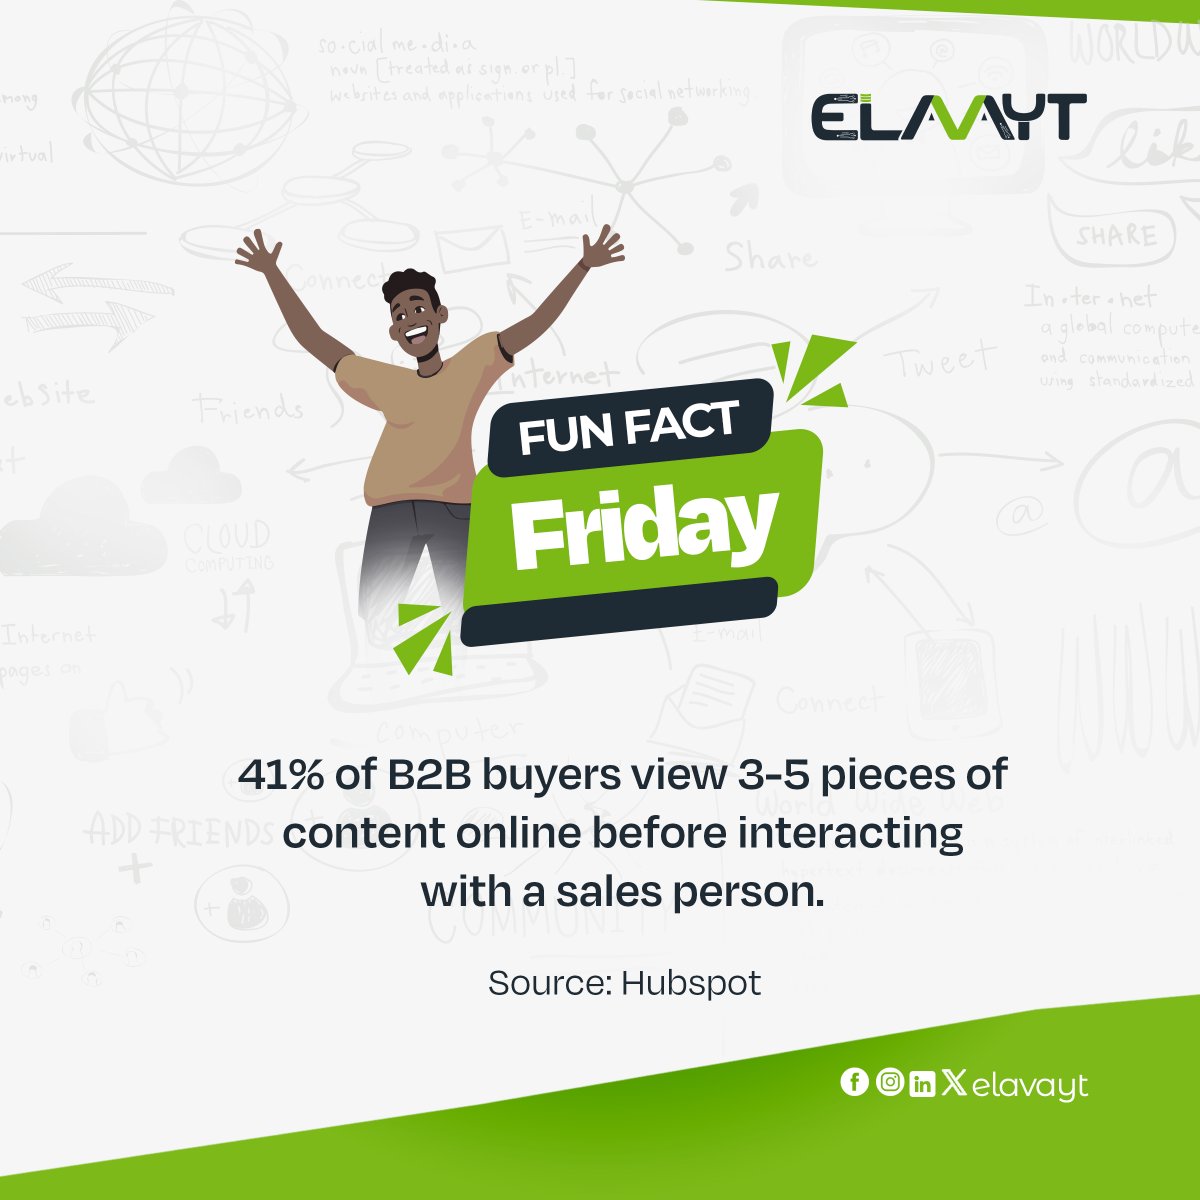 It's Friday!
The weekend is upon us and here is something you probably didn't know before now on B2B 

#elavayt #B2B #salessuccess #FunFactsFriday #FridayFeeling #business #elavaytsales